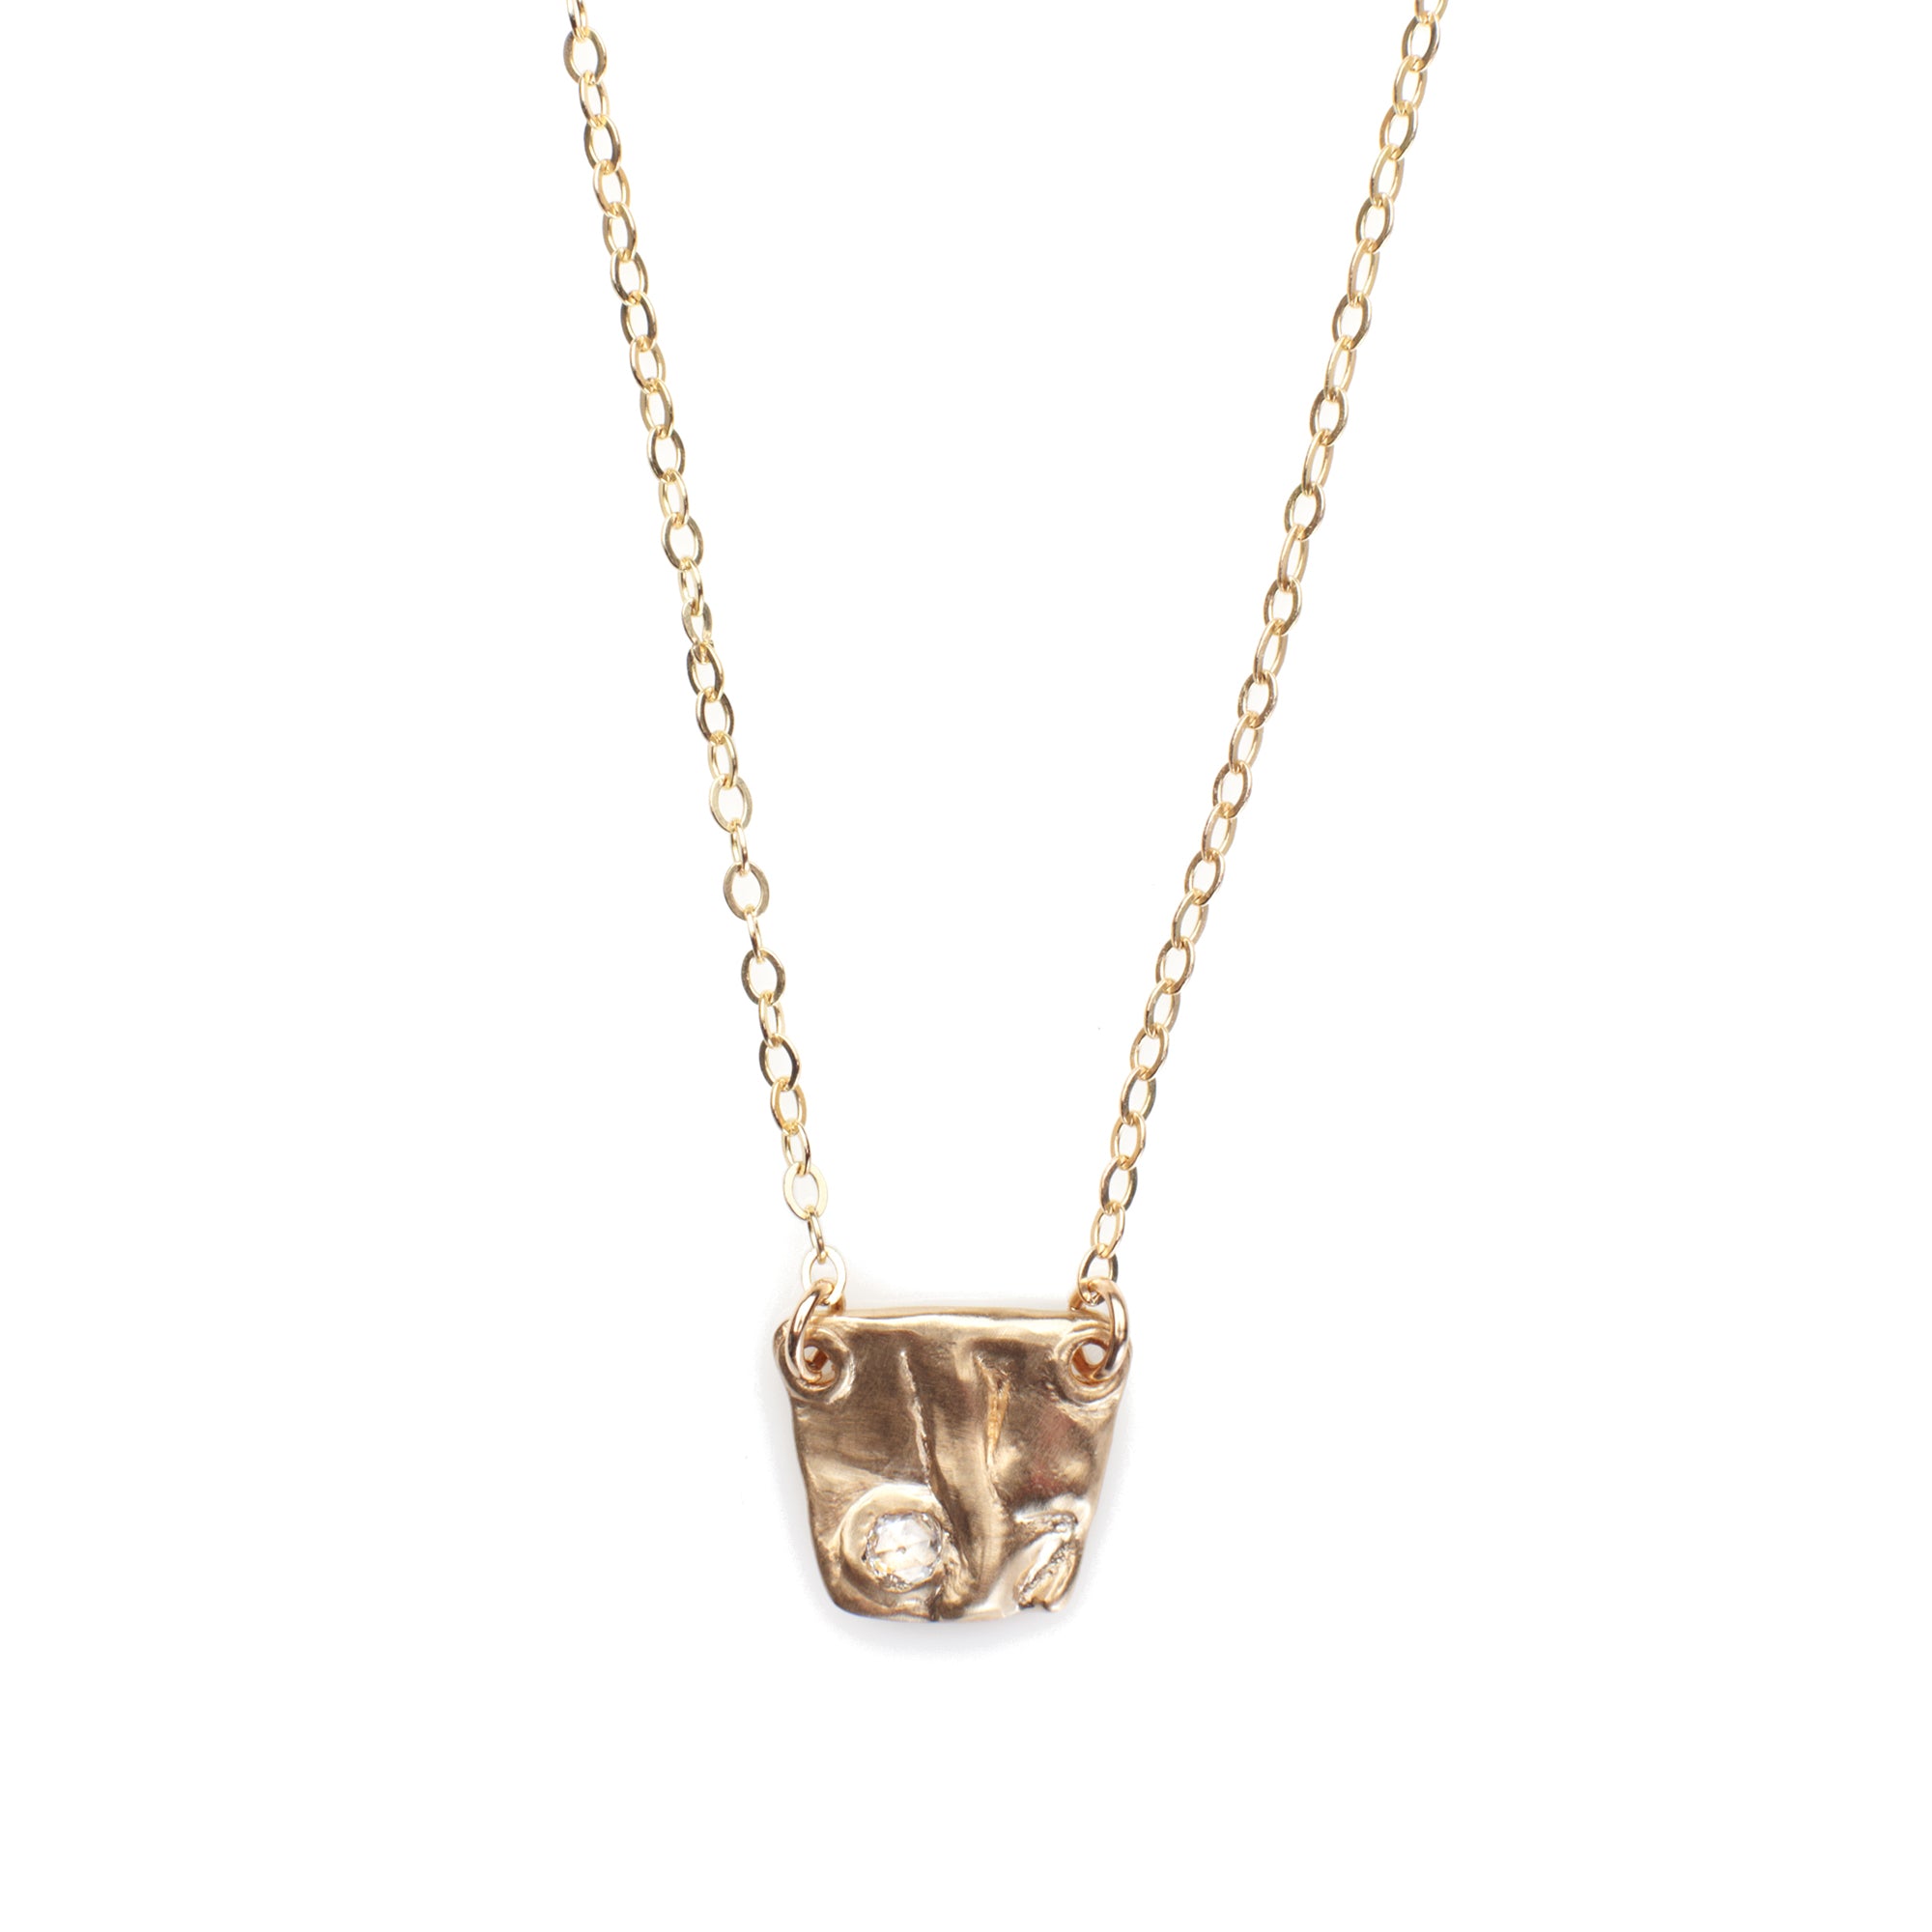 Our Pebble Necklace is a sweet pendant necklace with a rose cut diamond bezel set in solid 14k gold. 